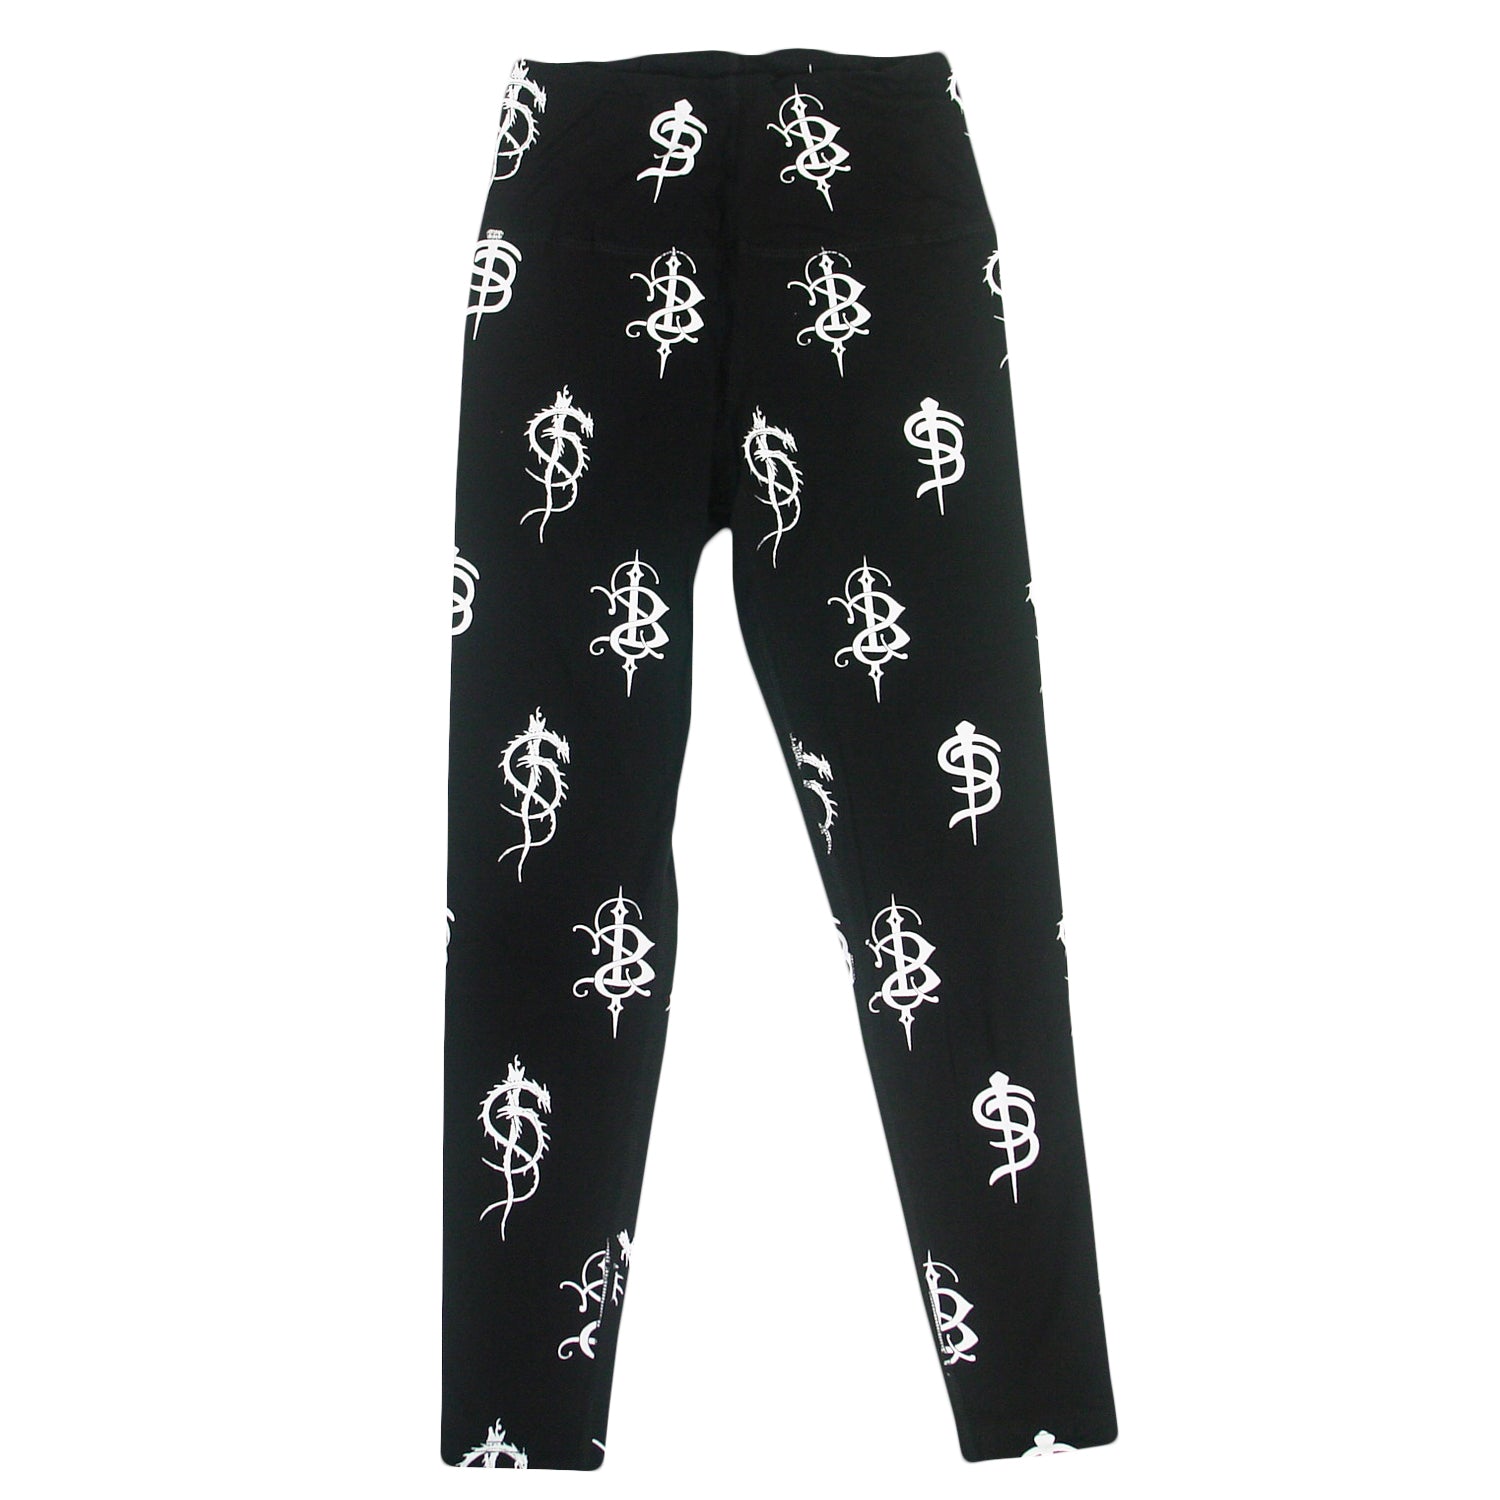 image of black leggings on a white background. leggings have white printed skinny puppy logos repeated all over